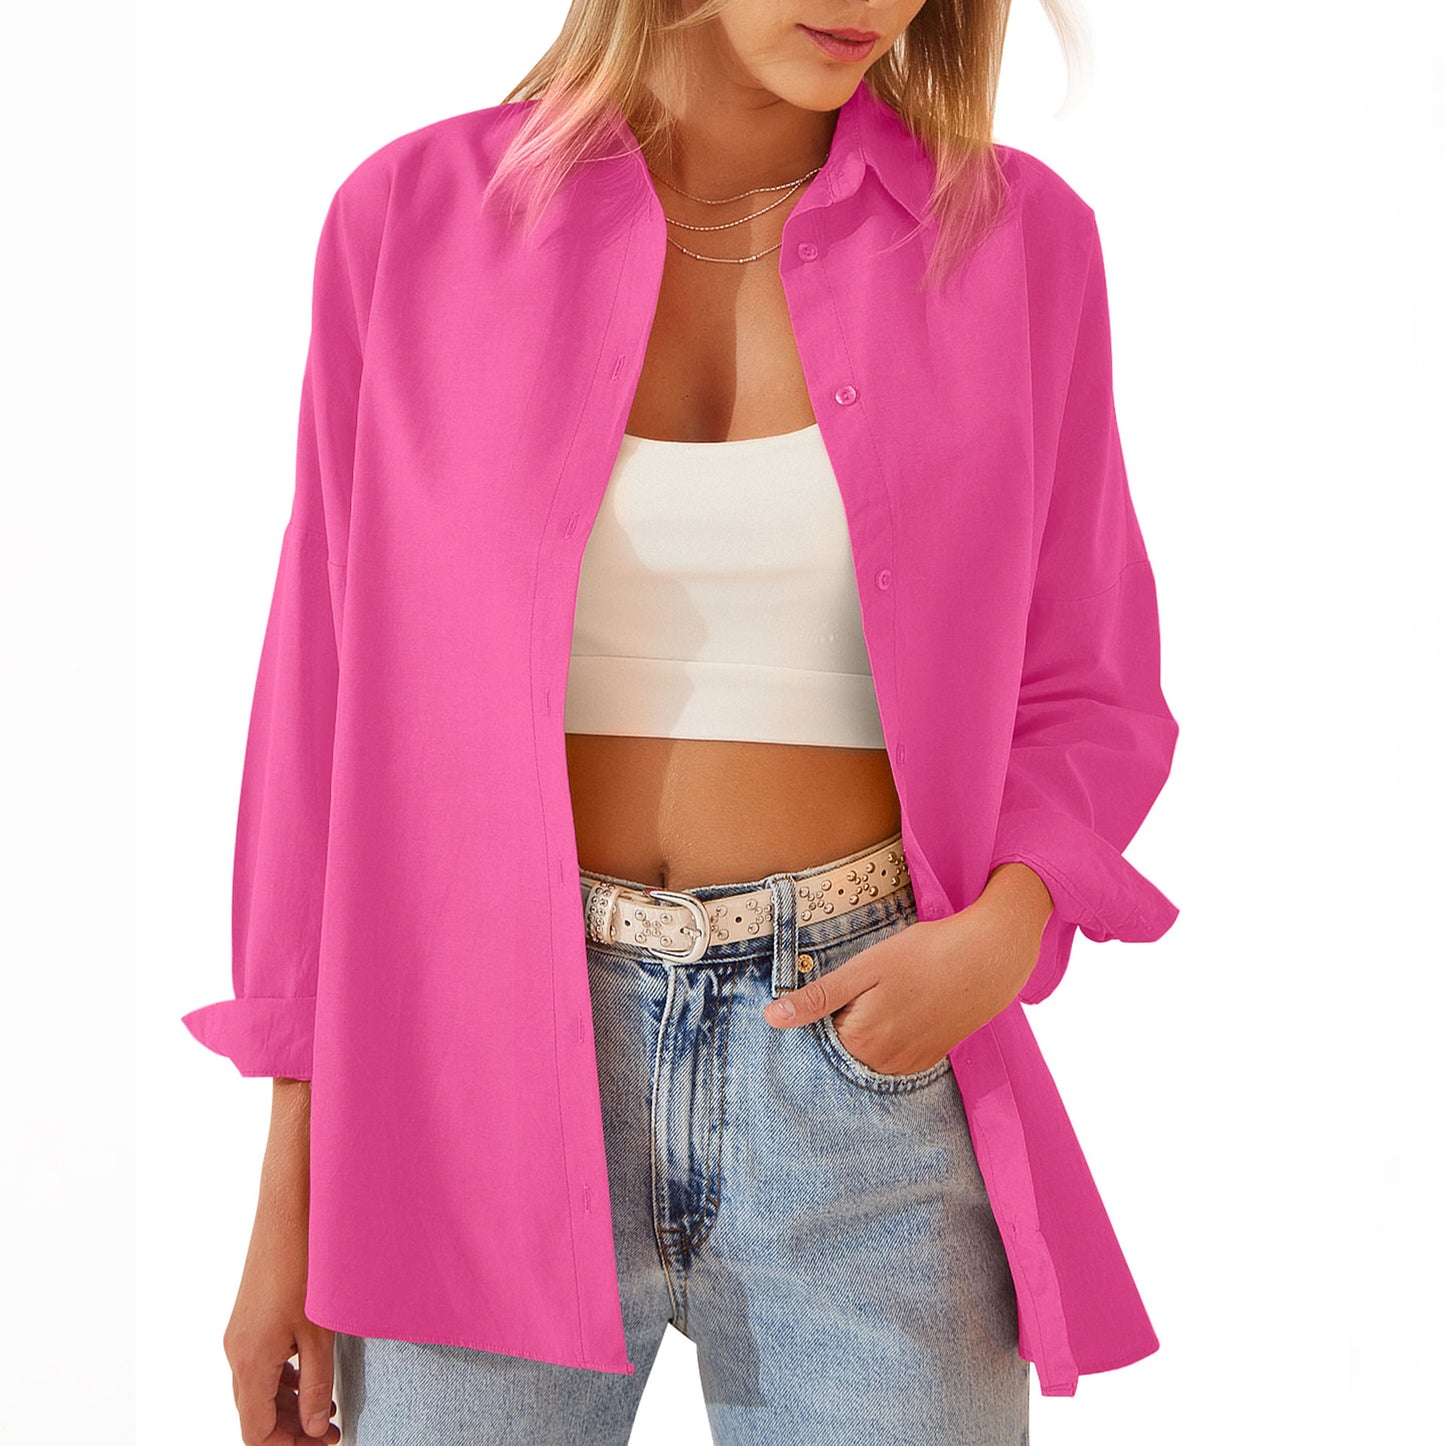 Shirt  | Women's Shirt Jacket Long Sleeve Blouse Button Down Tops Candy Color Shirt | Rose Red |  2XL| thecurvestory.myshopify.com